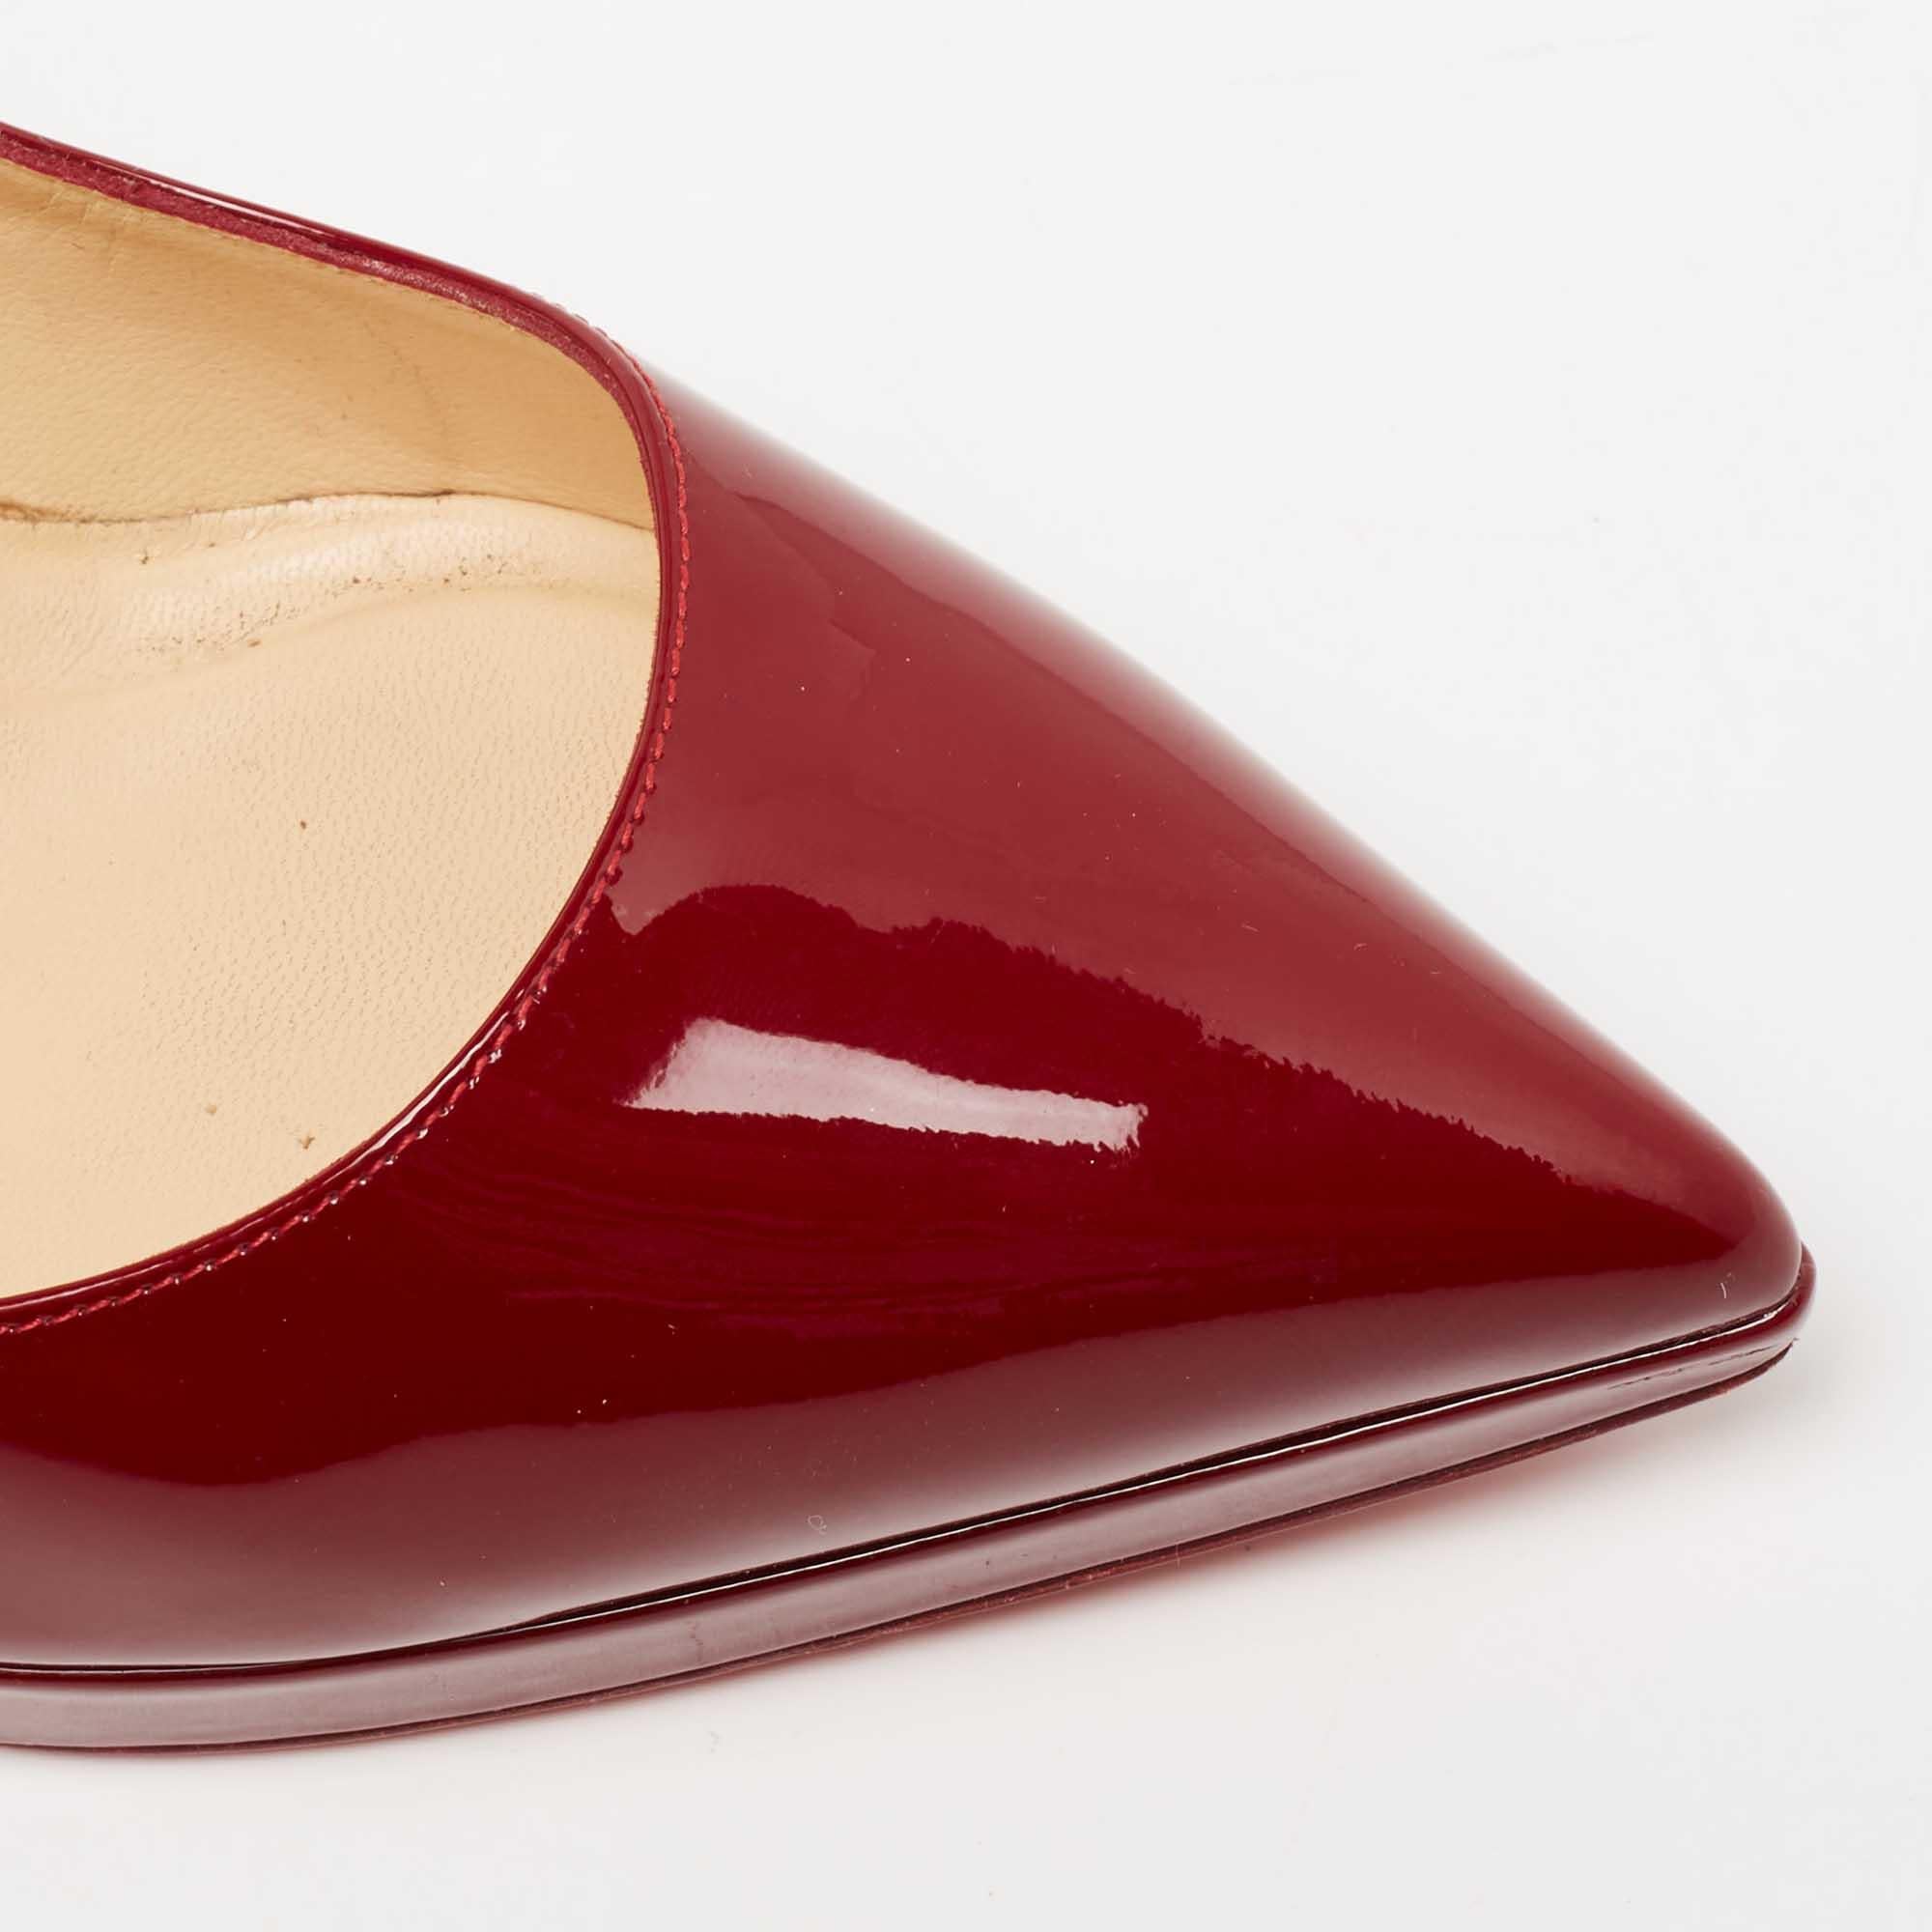 Christian Louboutin Burgundy Patent Leather Pigalle Plato Pumps Size 39 1